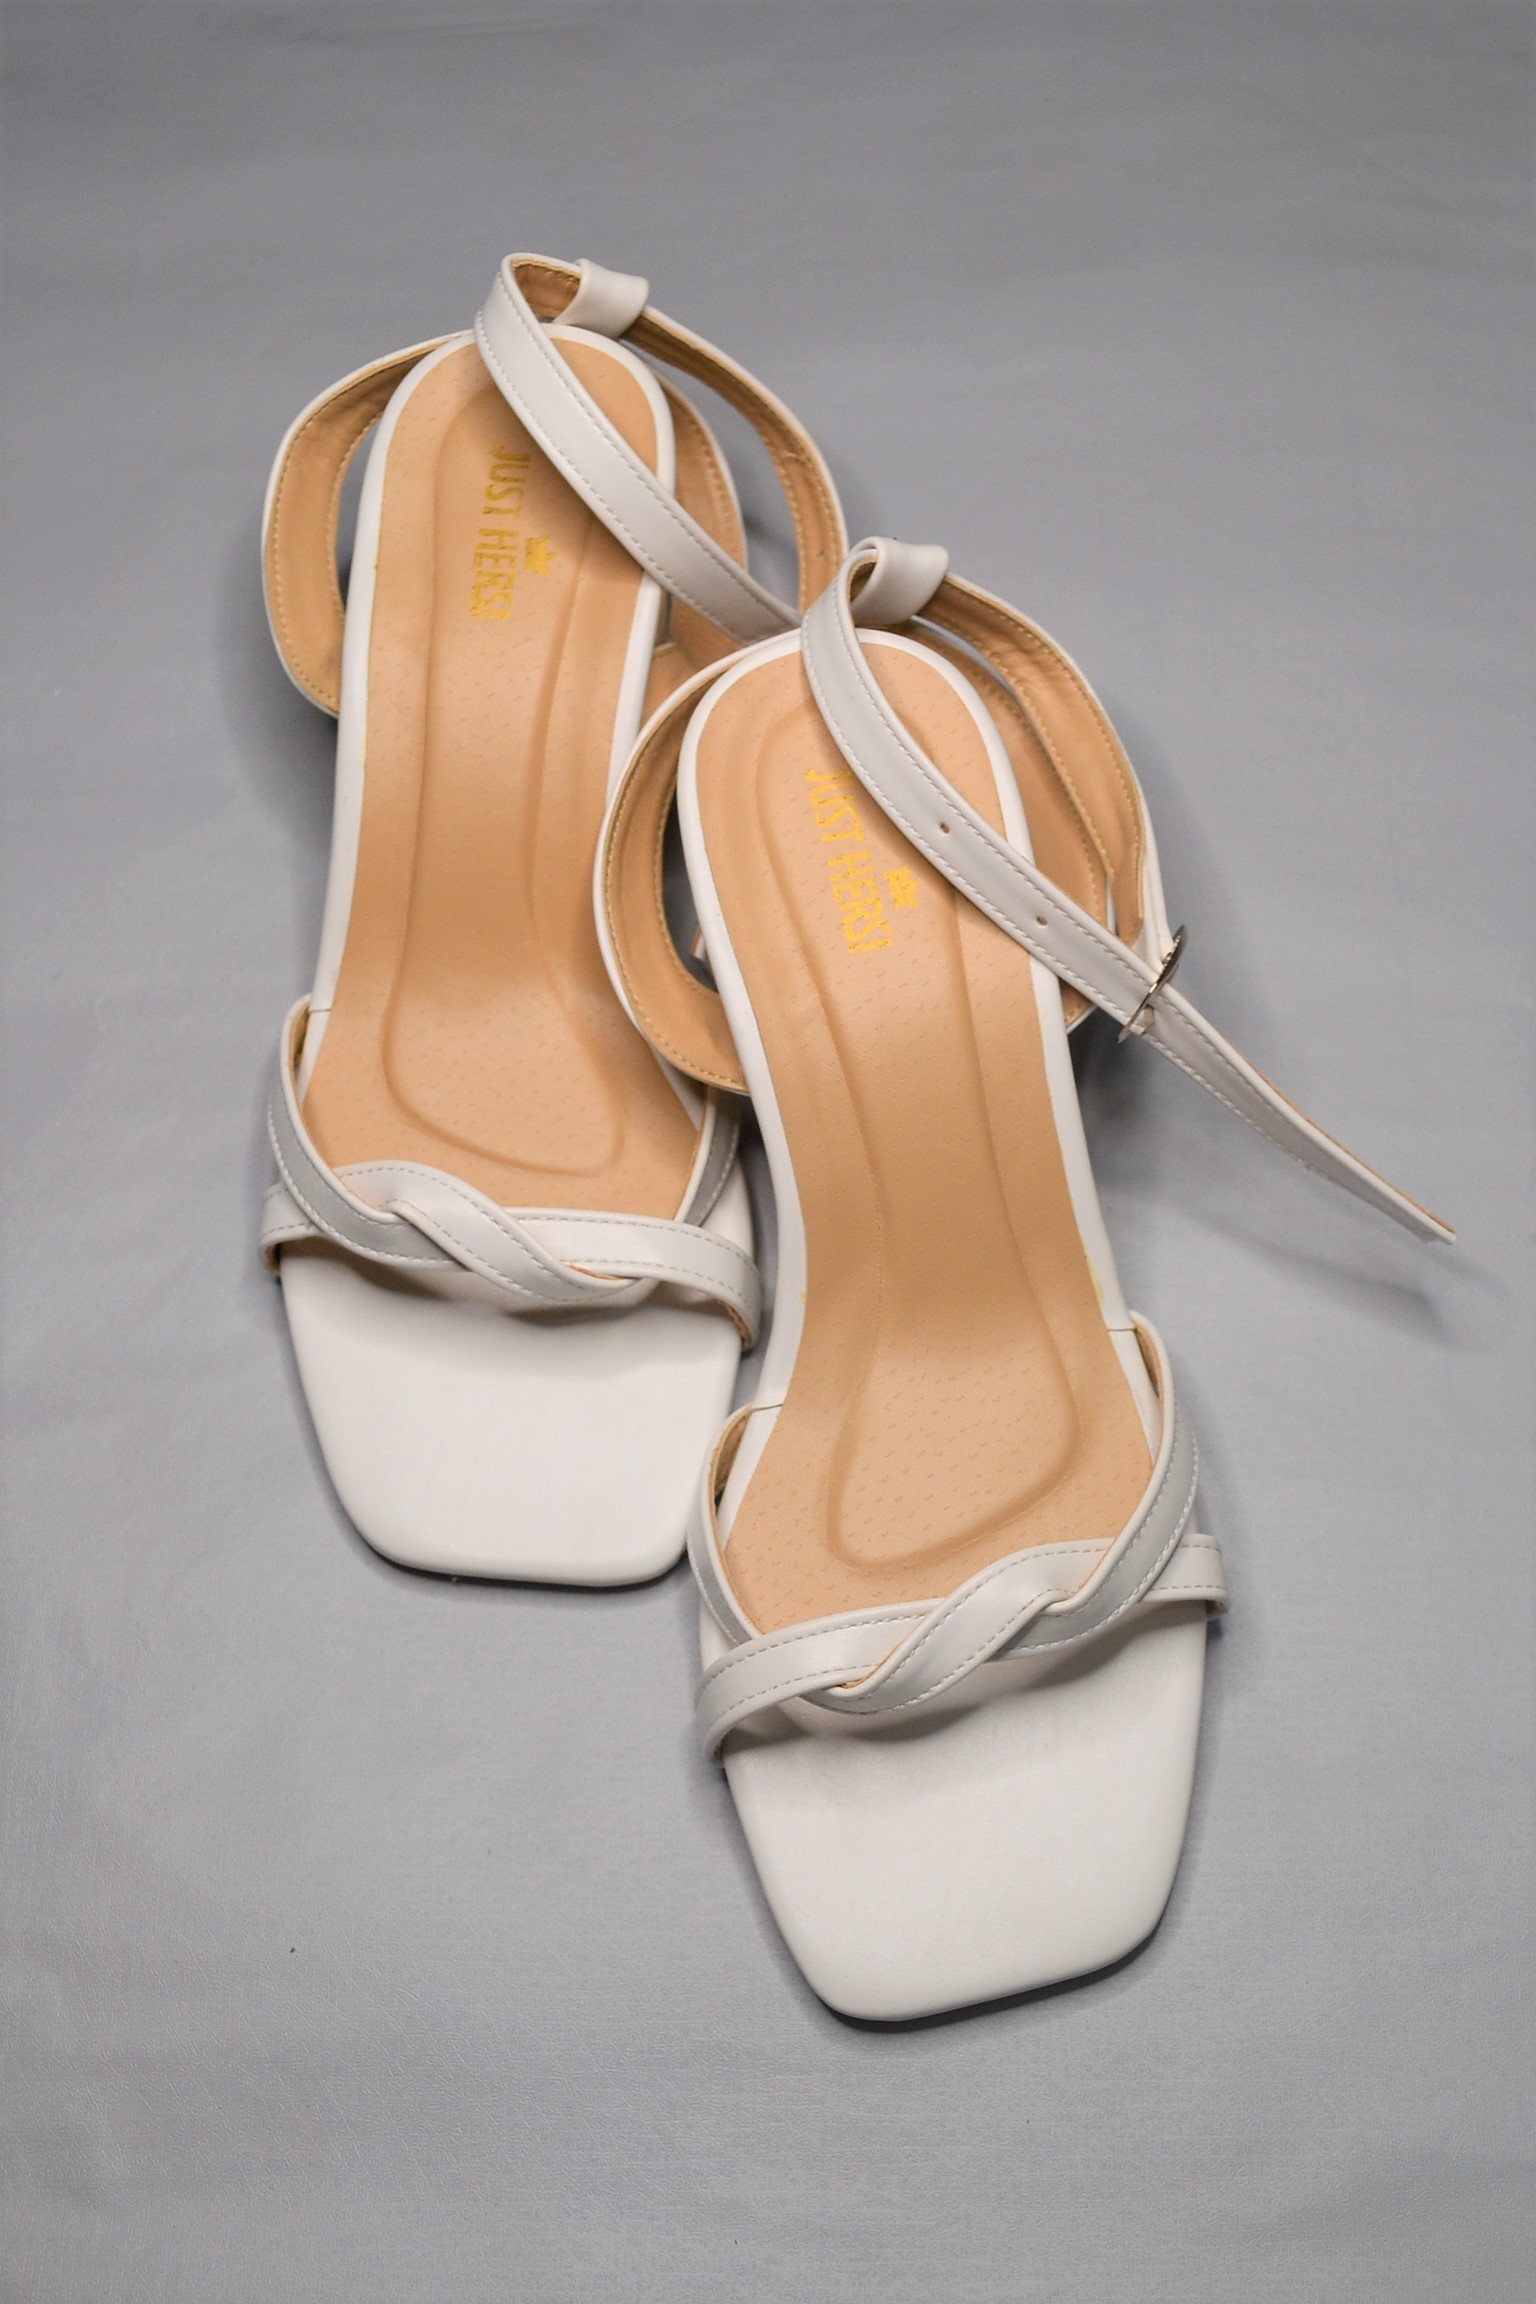 white shoes 2 inch heel